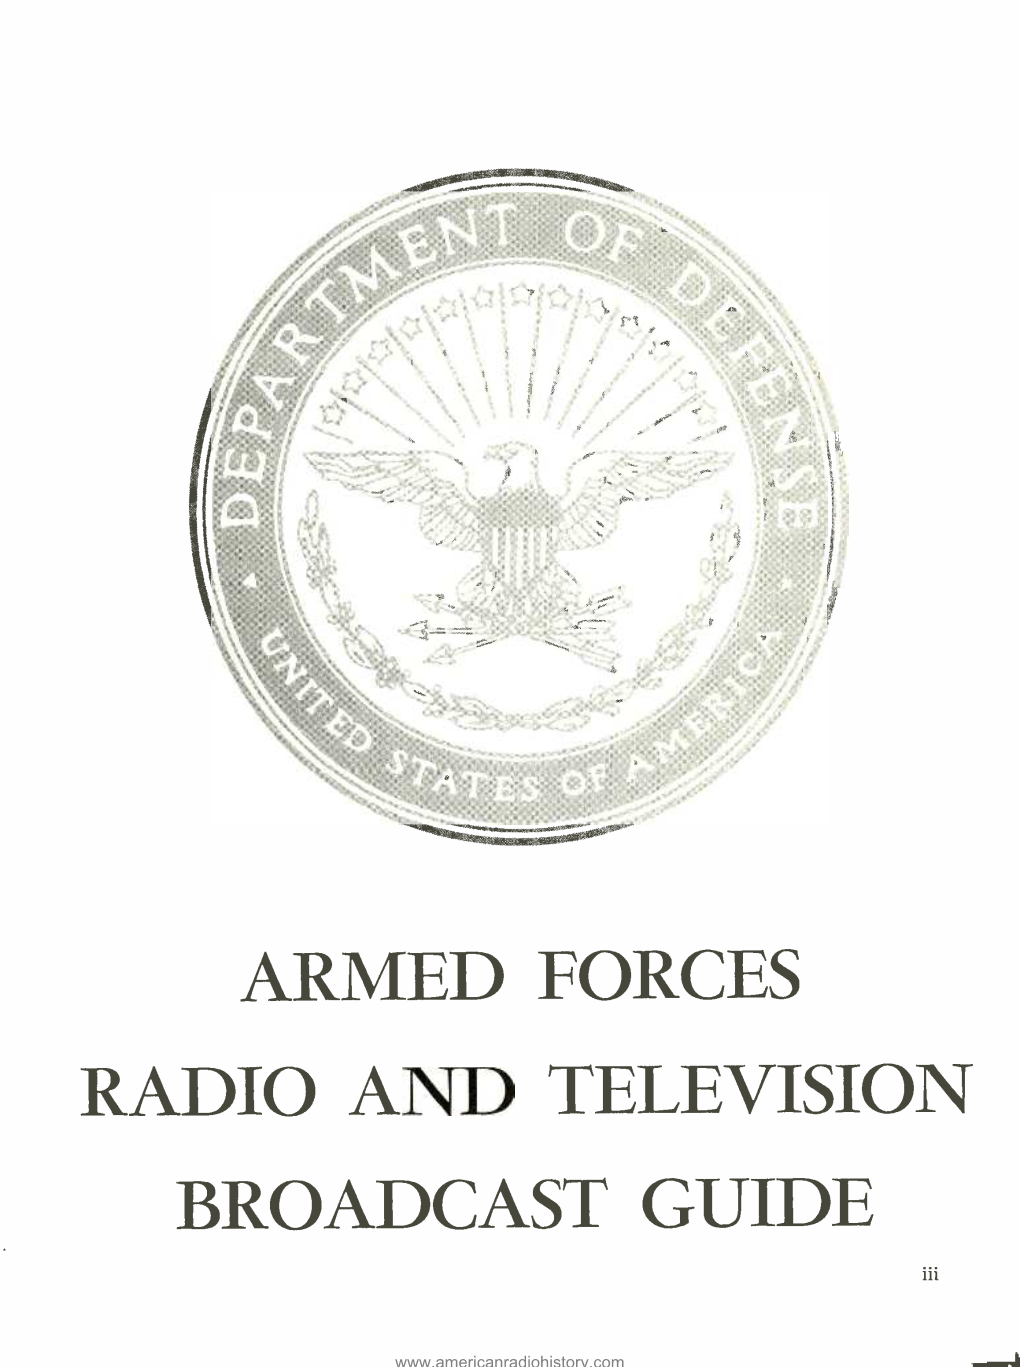 Armed Forces Radio and Television Broadcast Guide